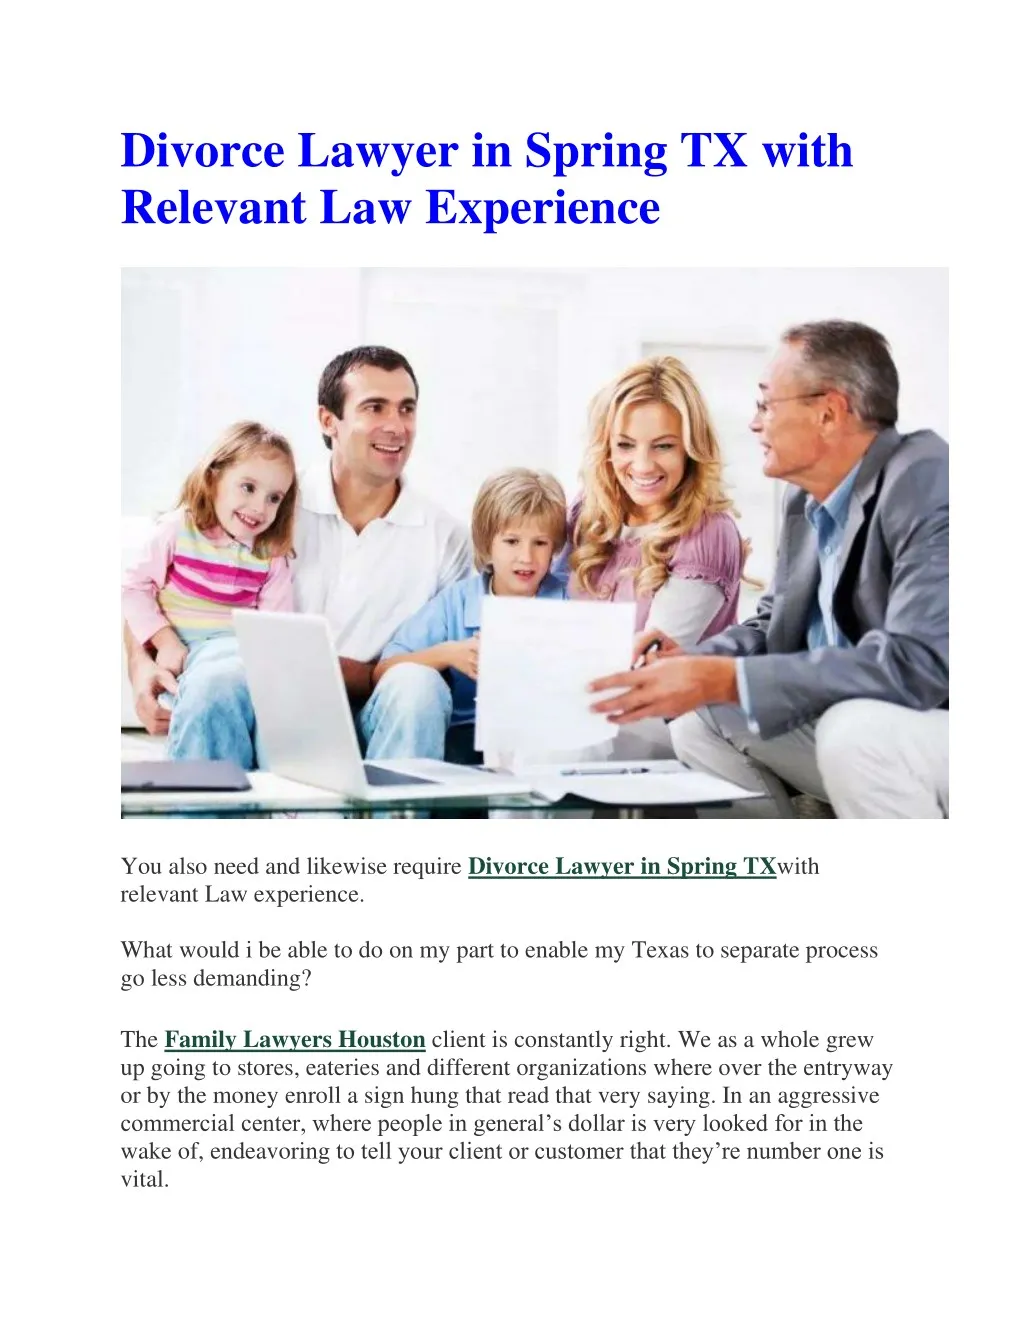 divorce lawyer in spring tx with relevant